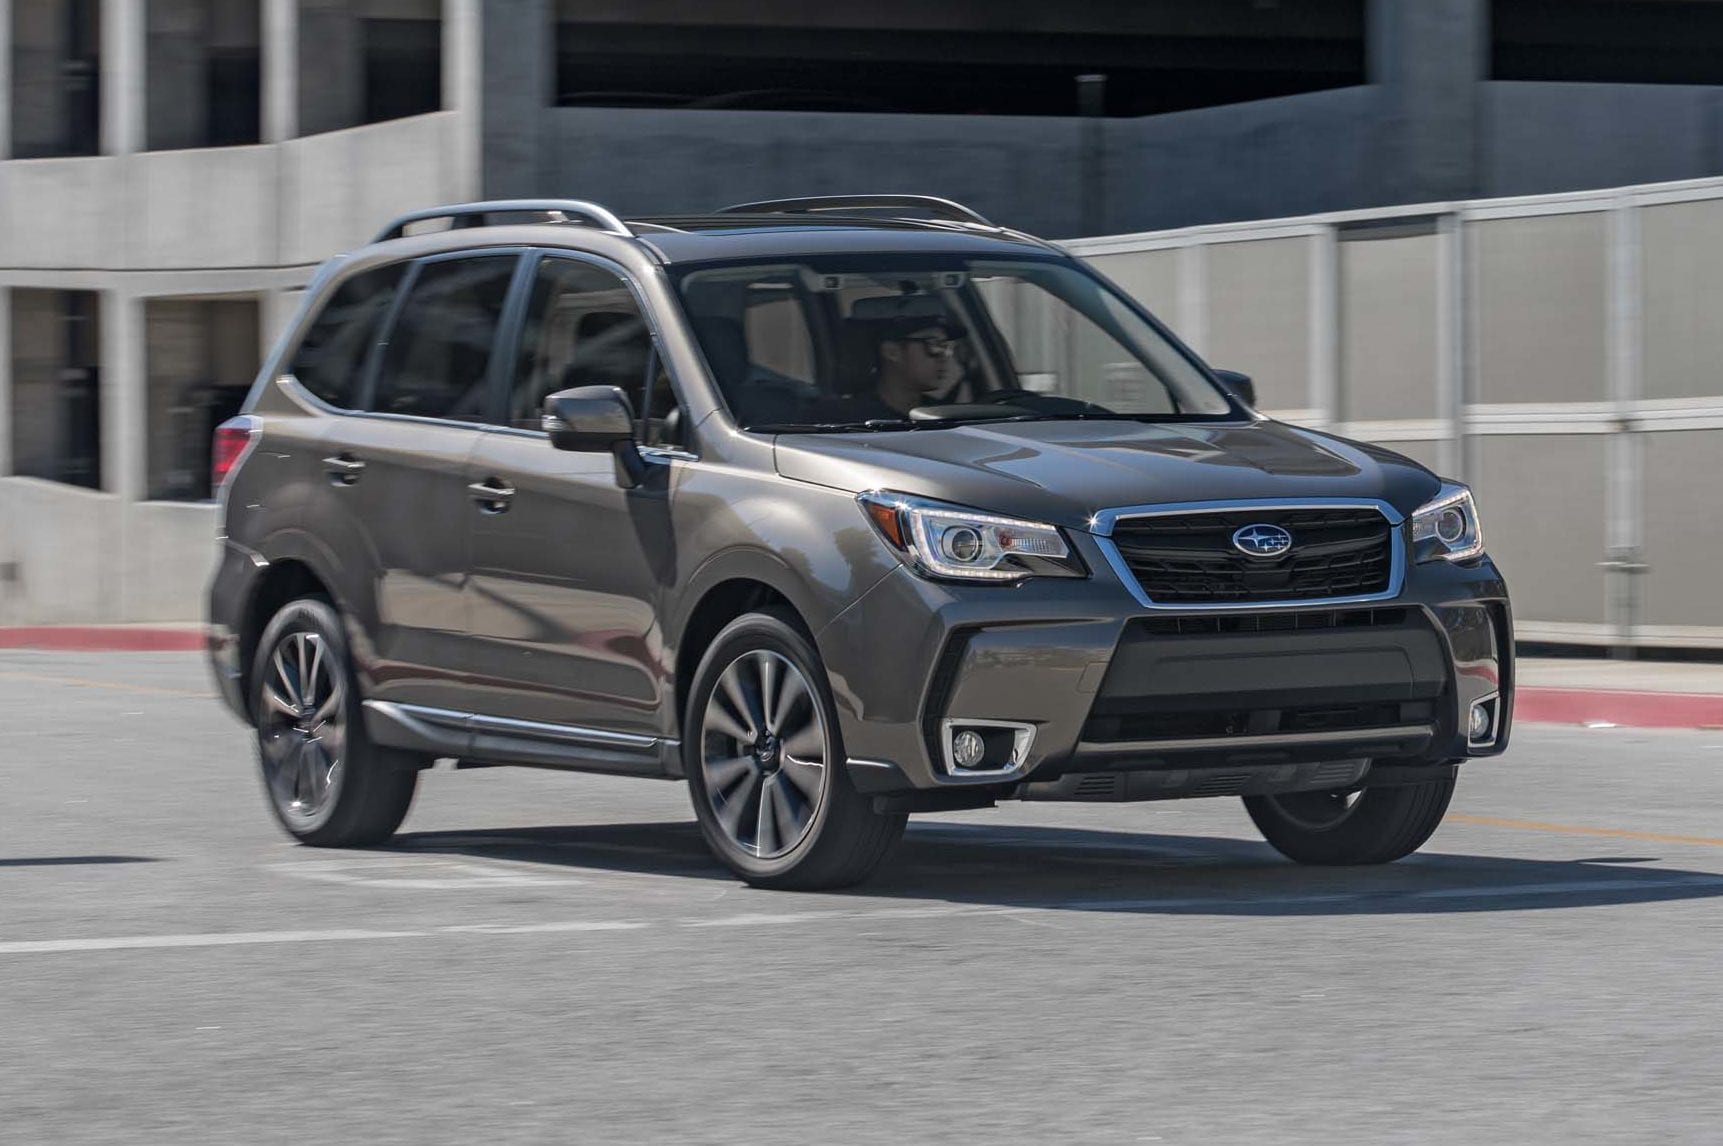 2017 Subaru Forester 2.0XT Touring First Test